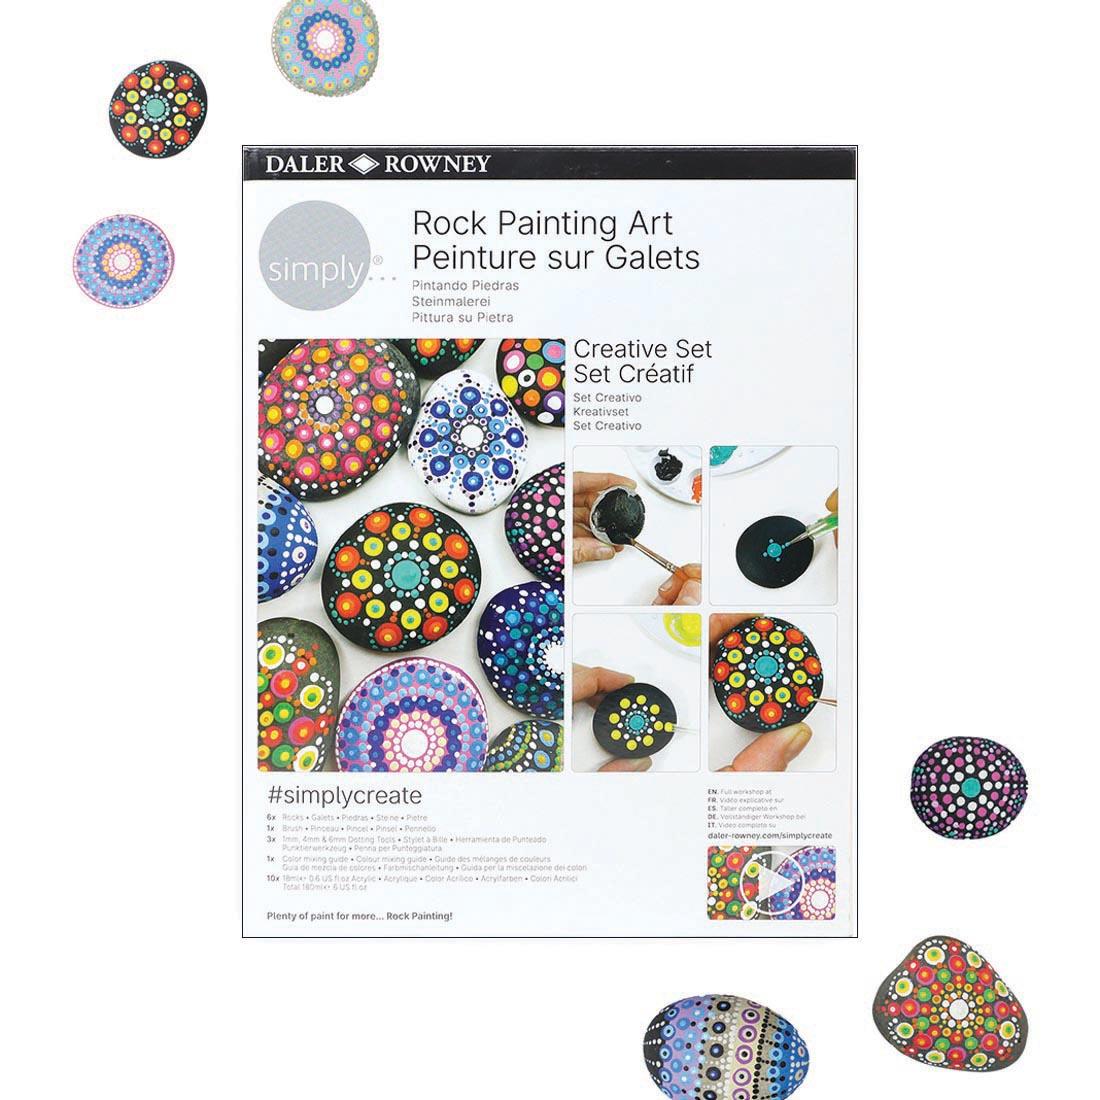 package for Rock Painting Art Creative Set surrounded by completed examples